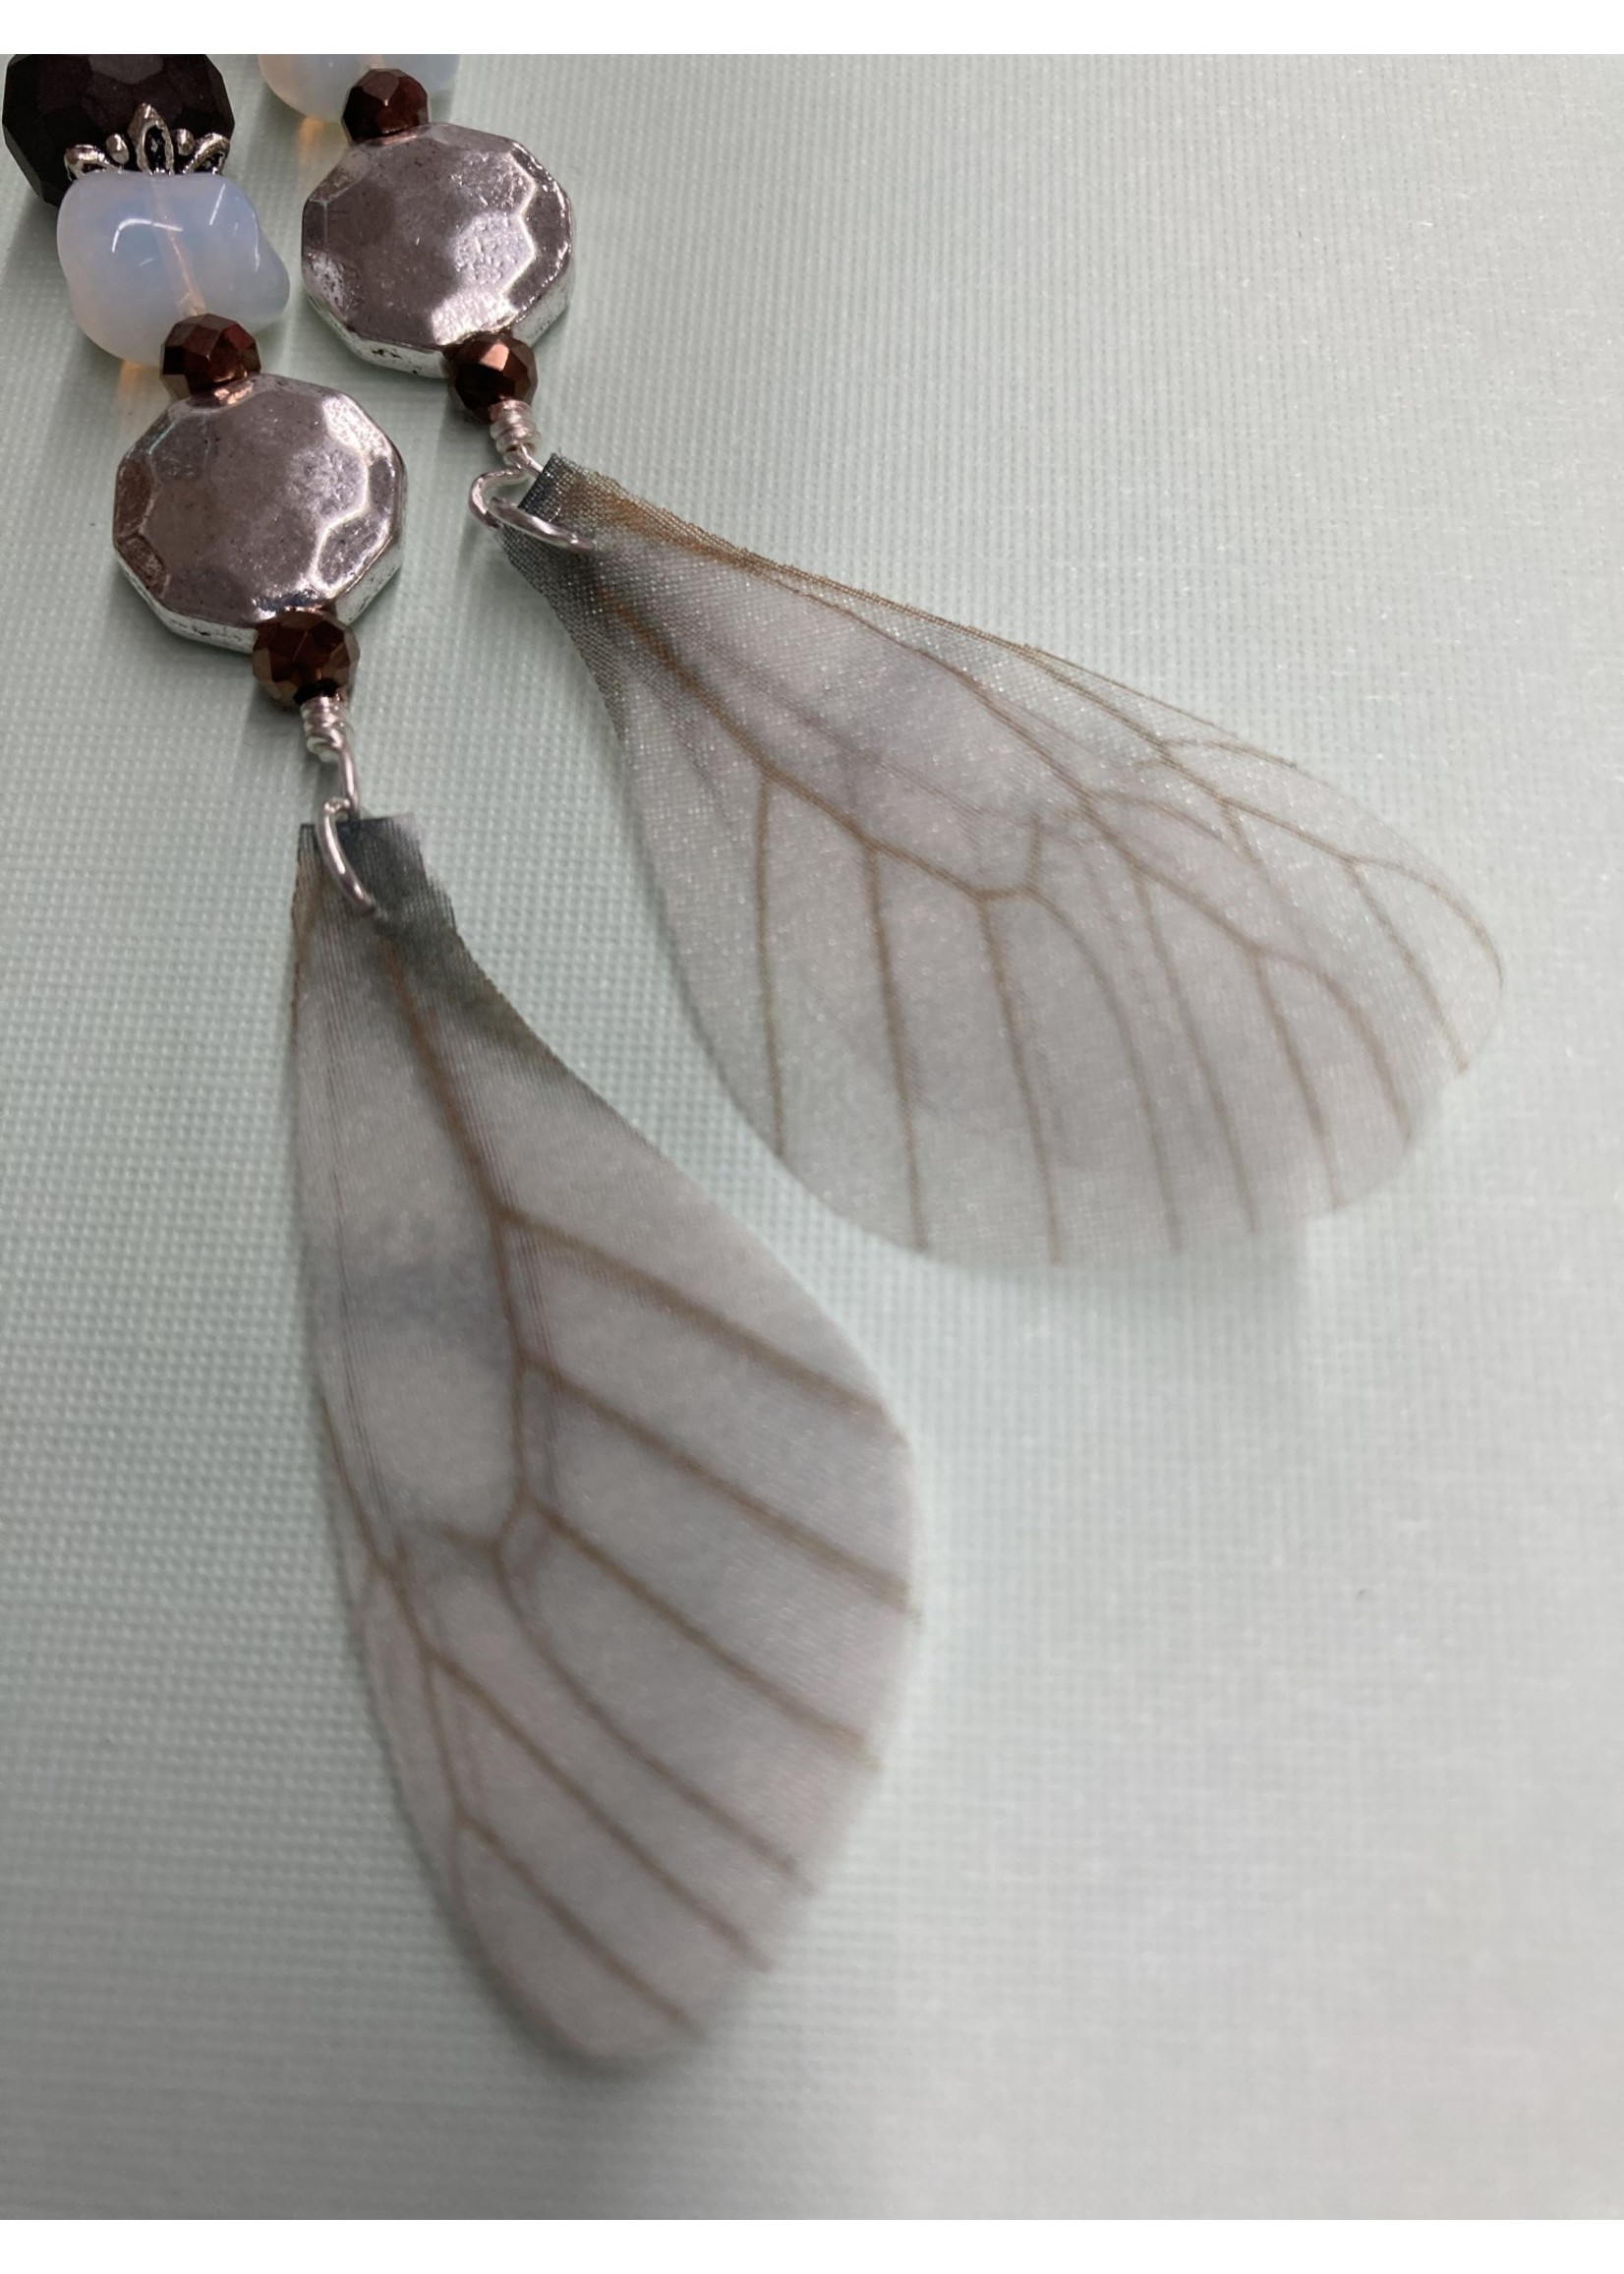 Our Twisted Dahlia E020  White Fairy Wings with Metal and Glass Bead Earrings